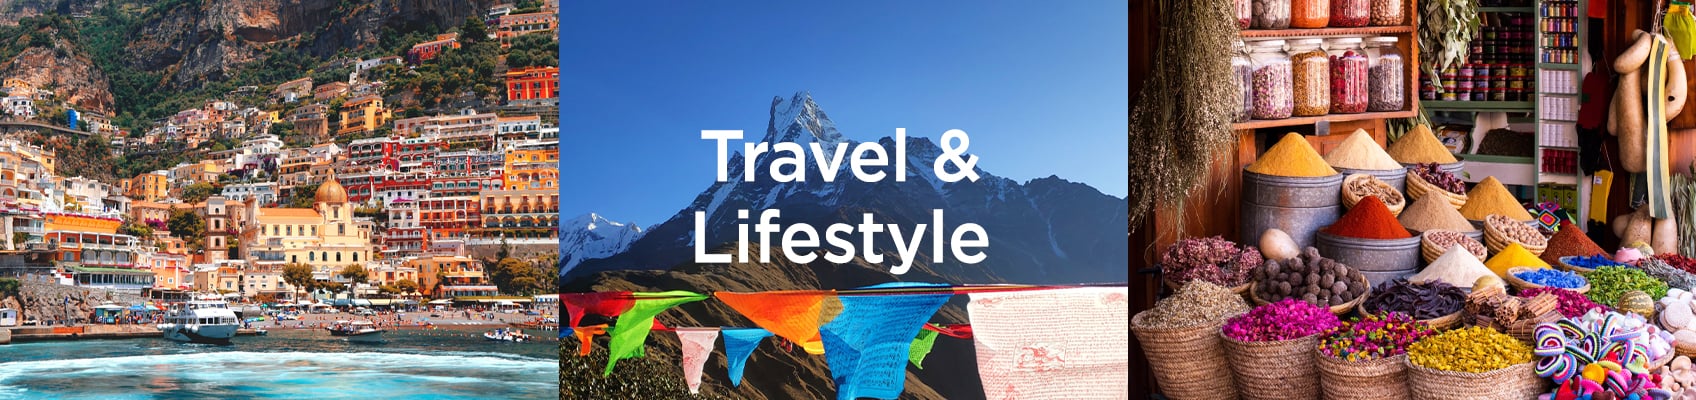 Perfect Match Travel and Lifestyle